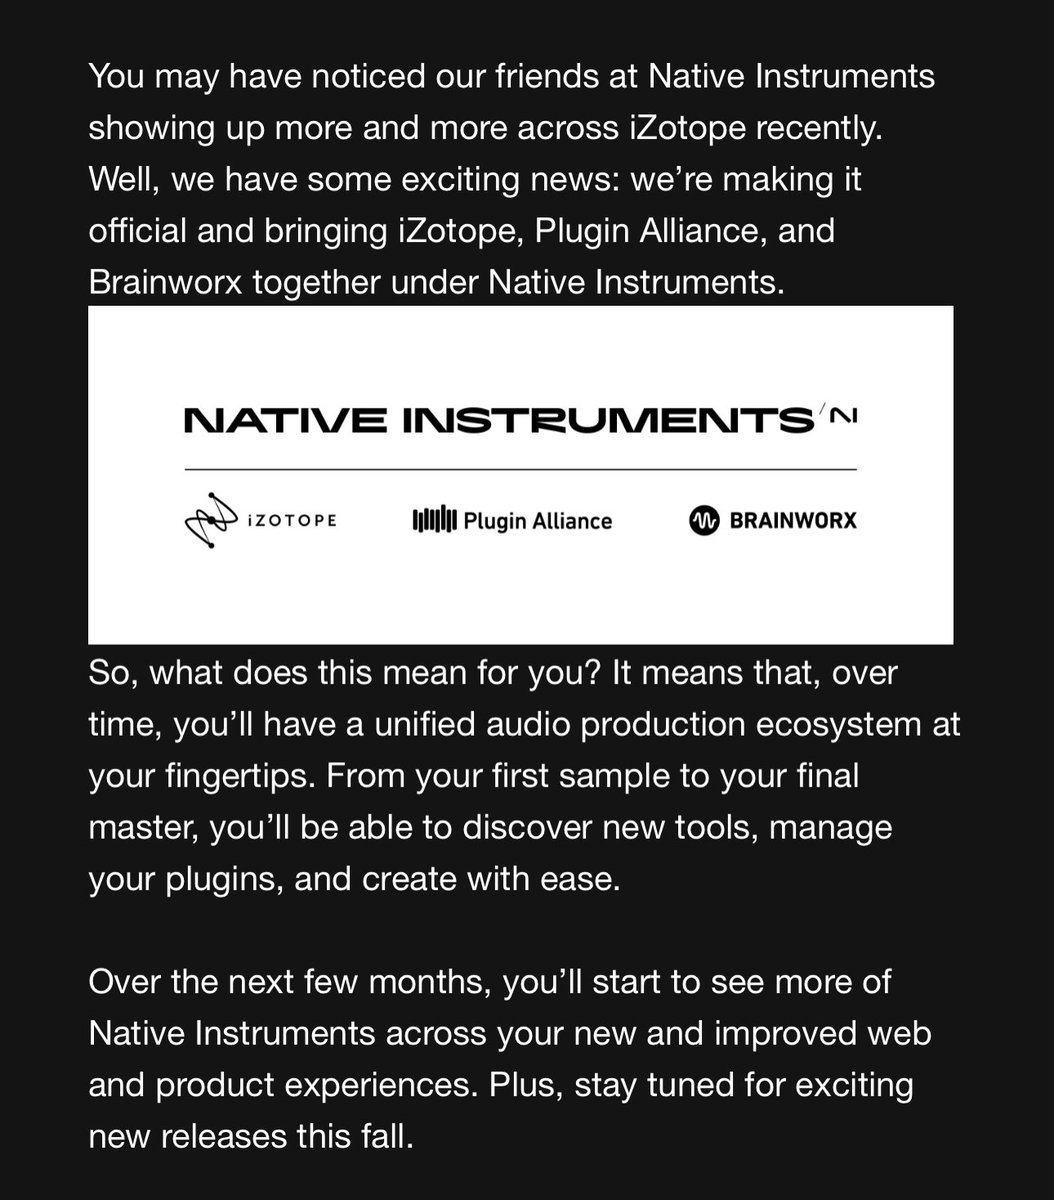 Izotope will be merging with Native Instruments 
#nativeinstruments #izotope